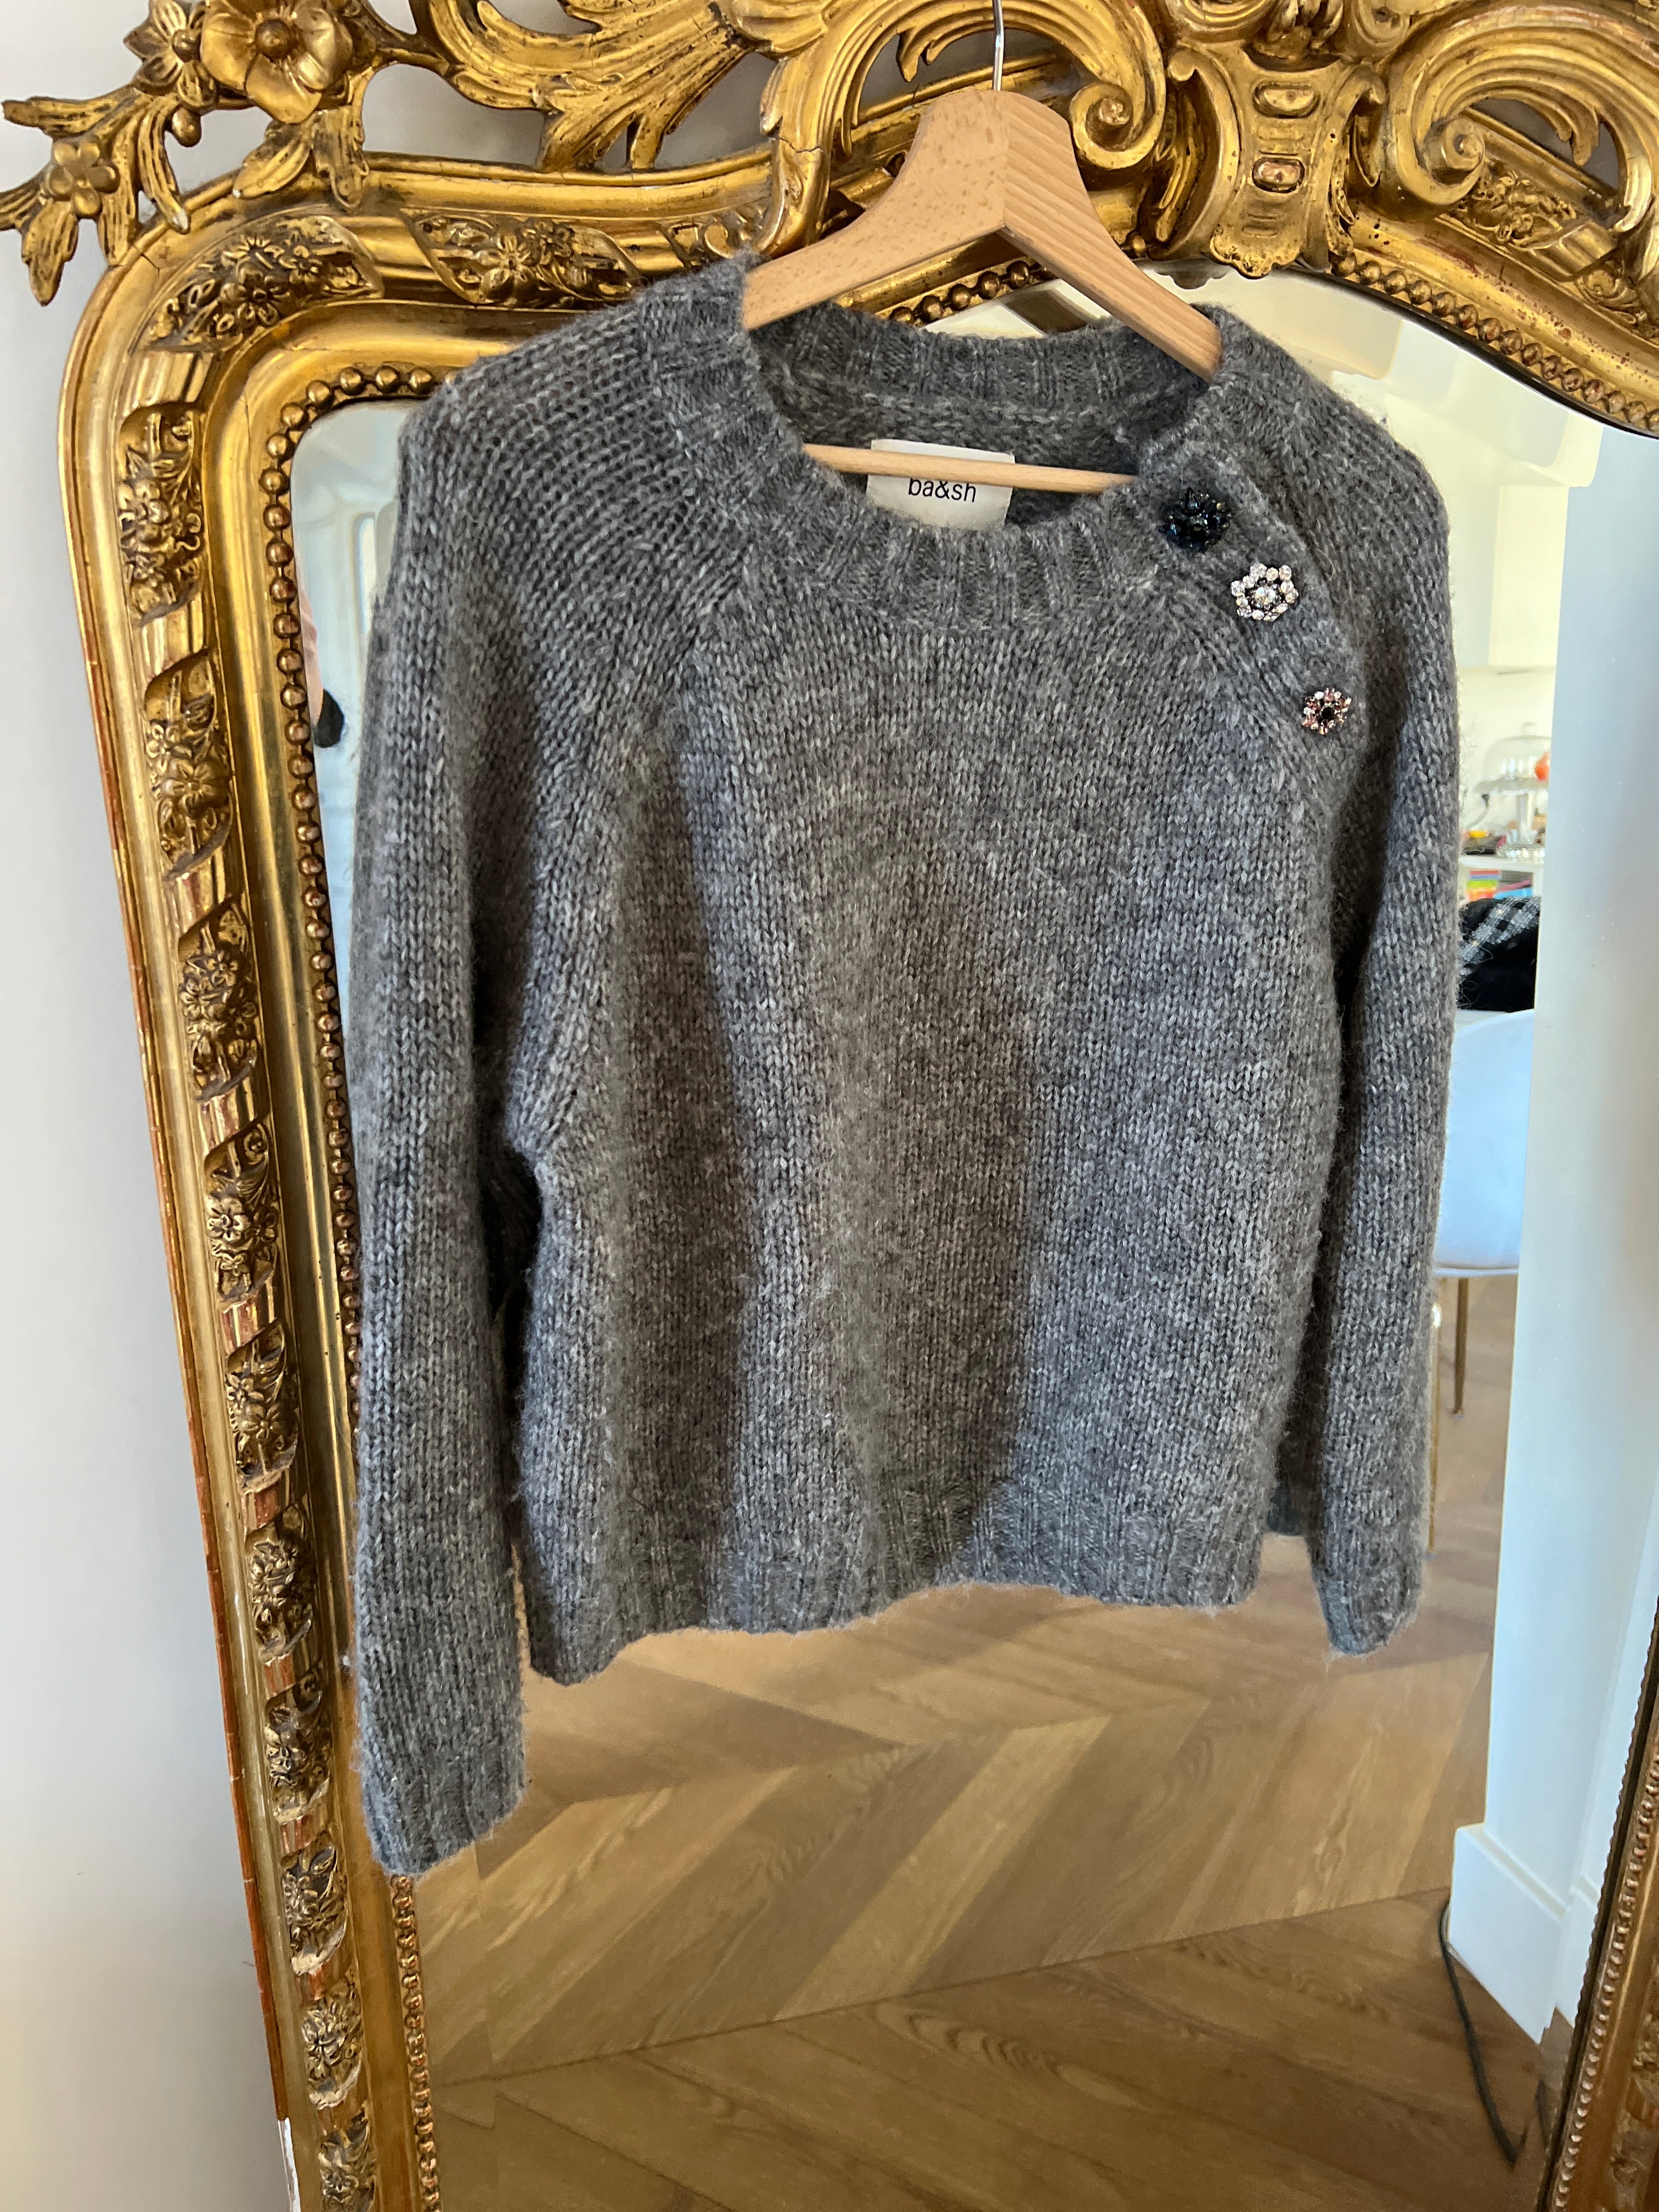 Pull Bash gris avec boutons strass